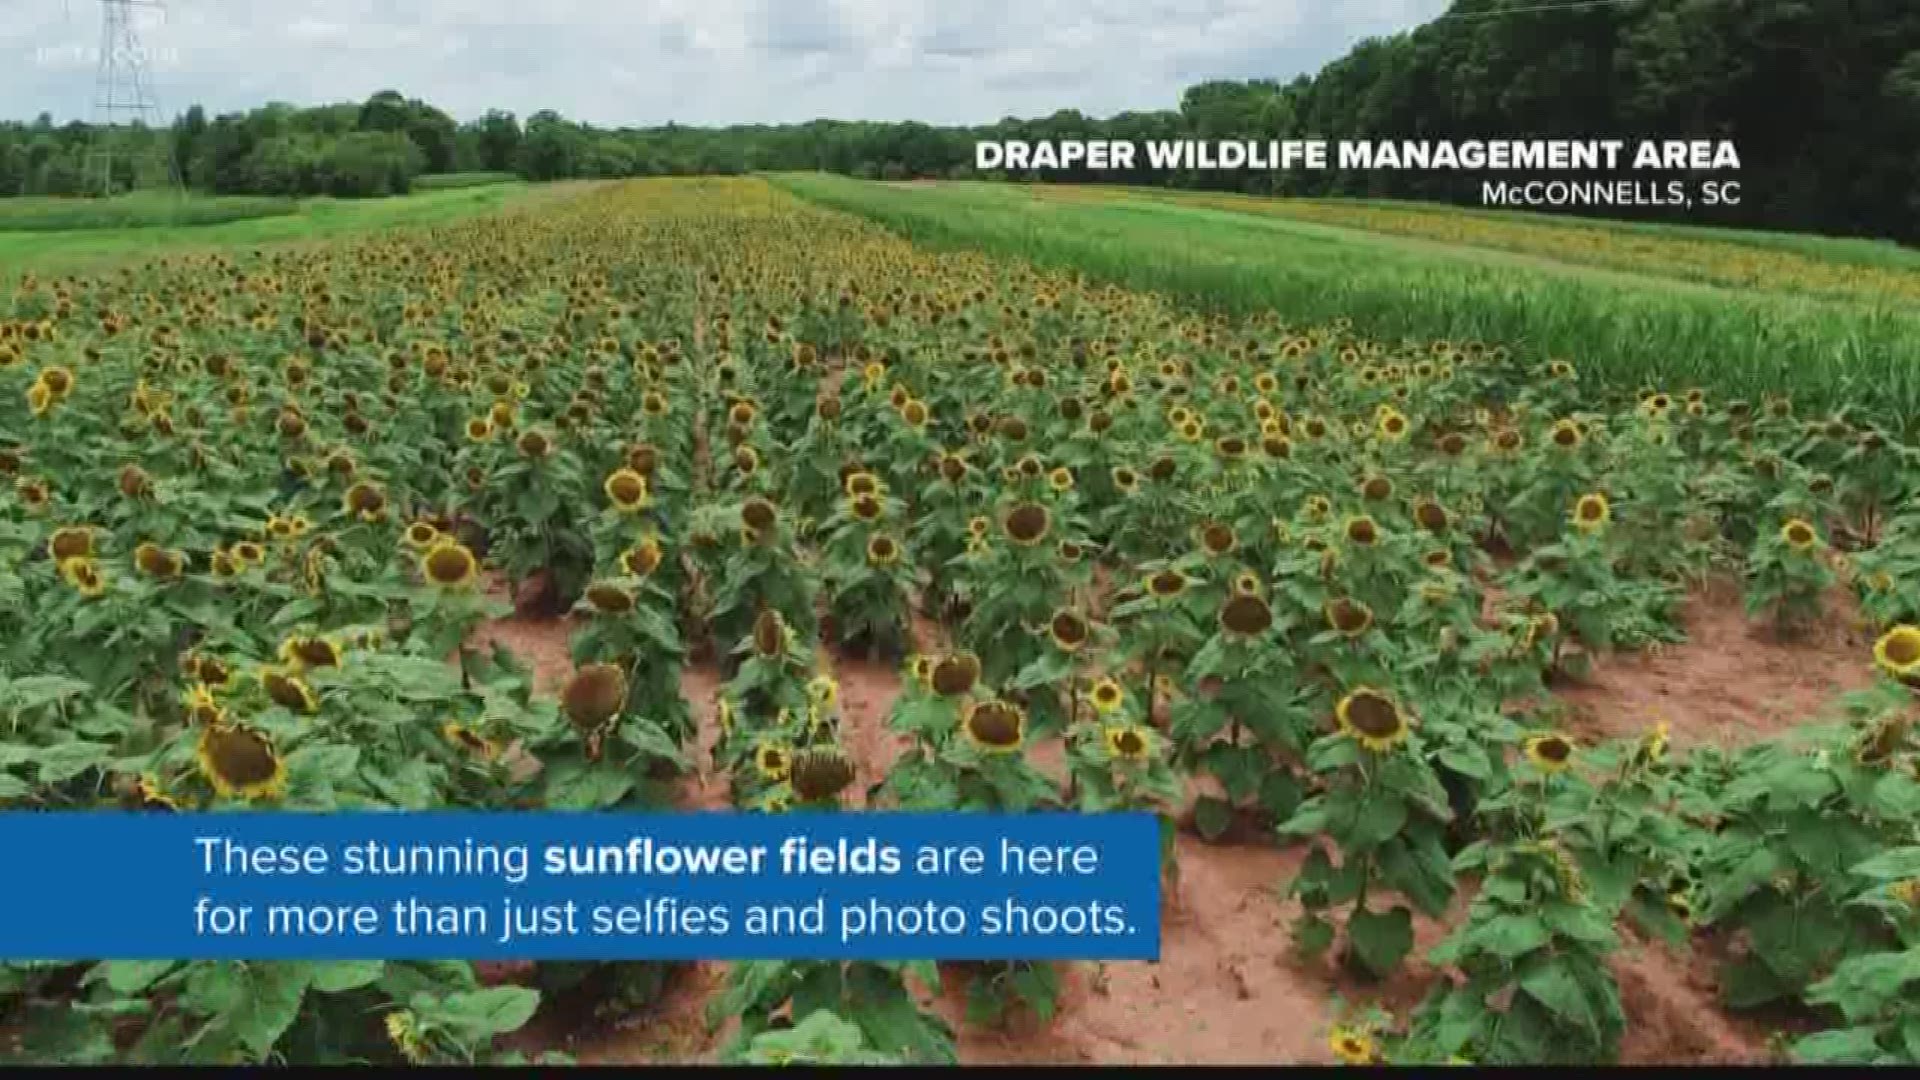 About an hour and fifteen minutes from Columbia, in the town of McConnells is a really wonderful sunflower field 